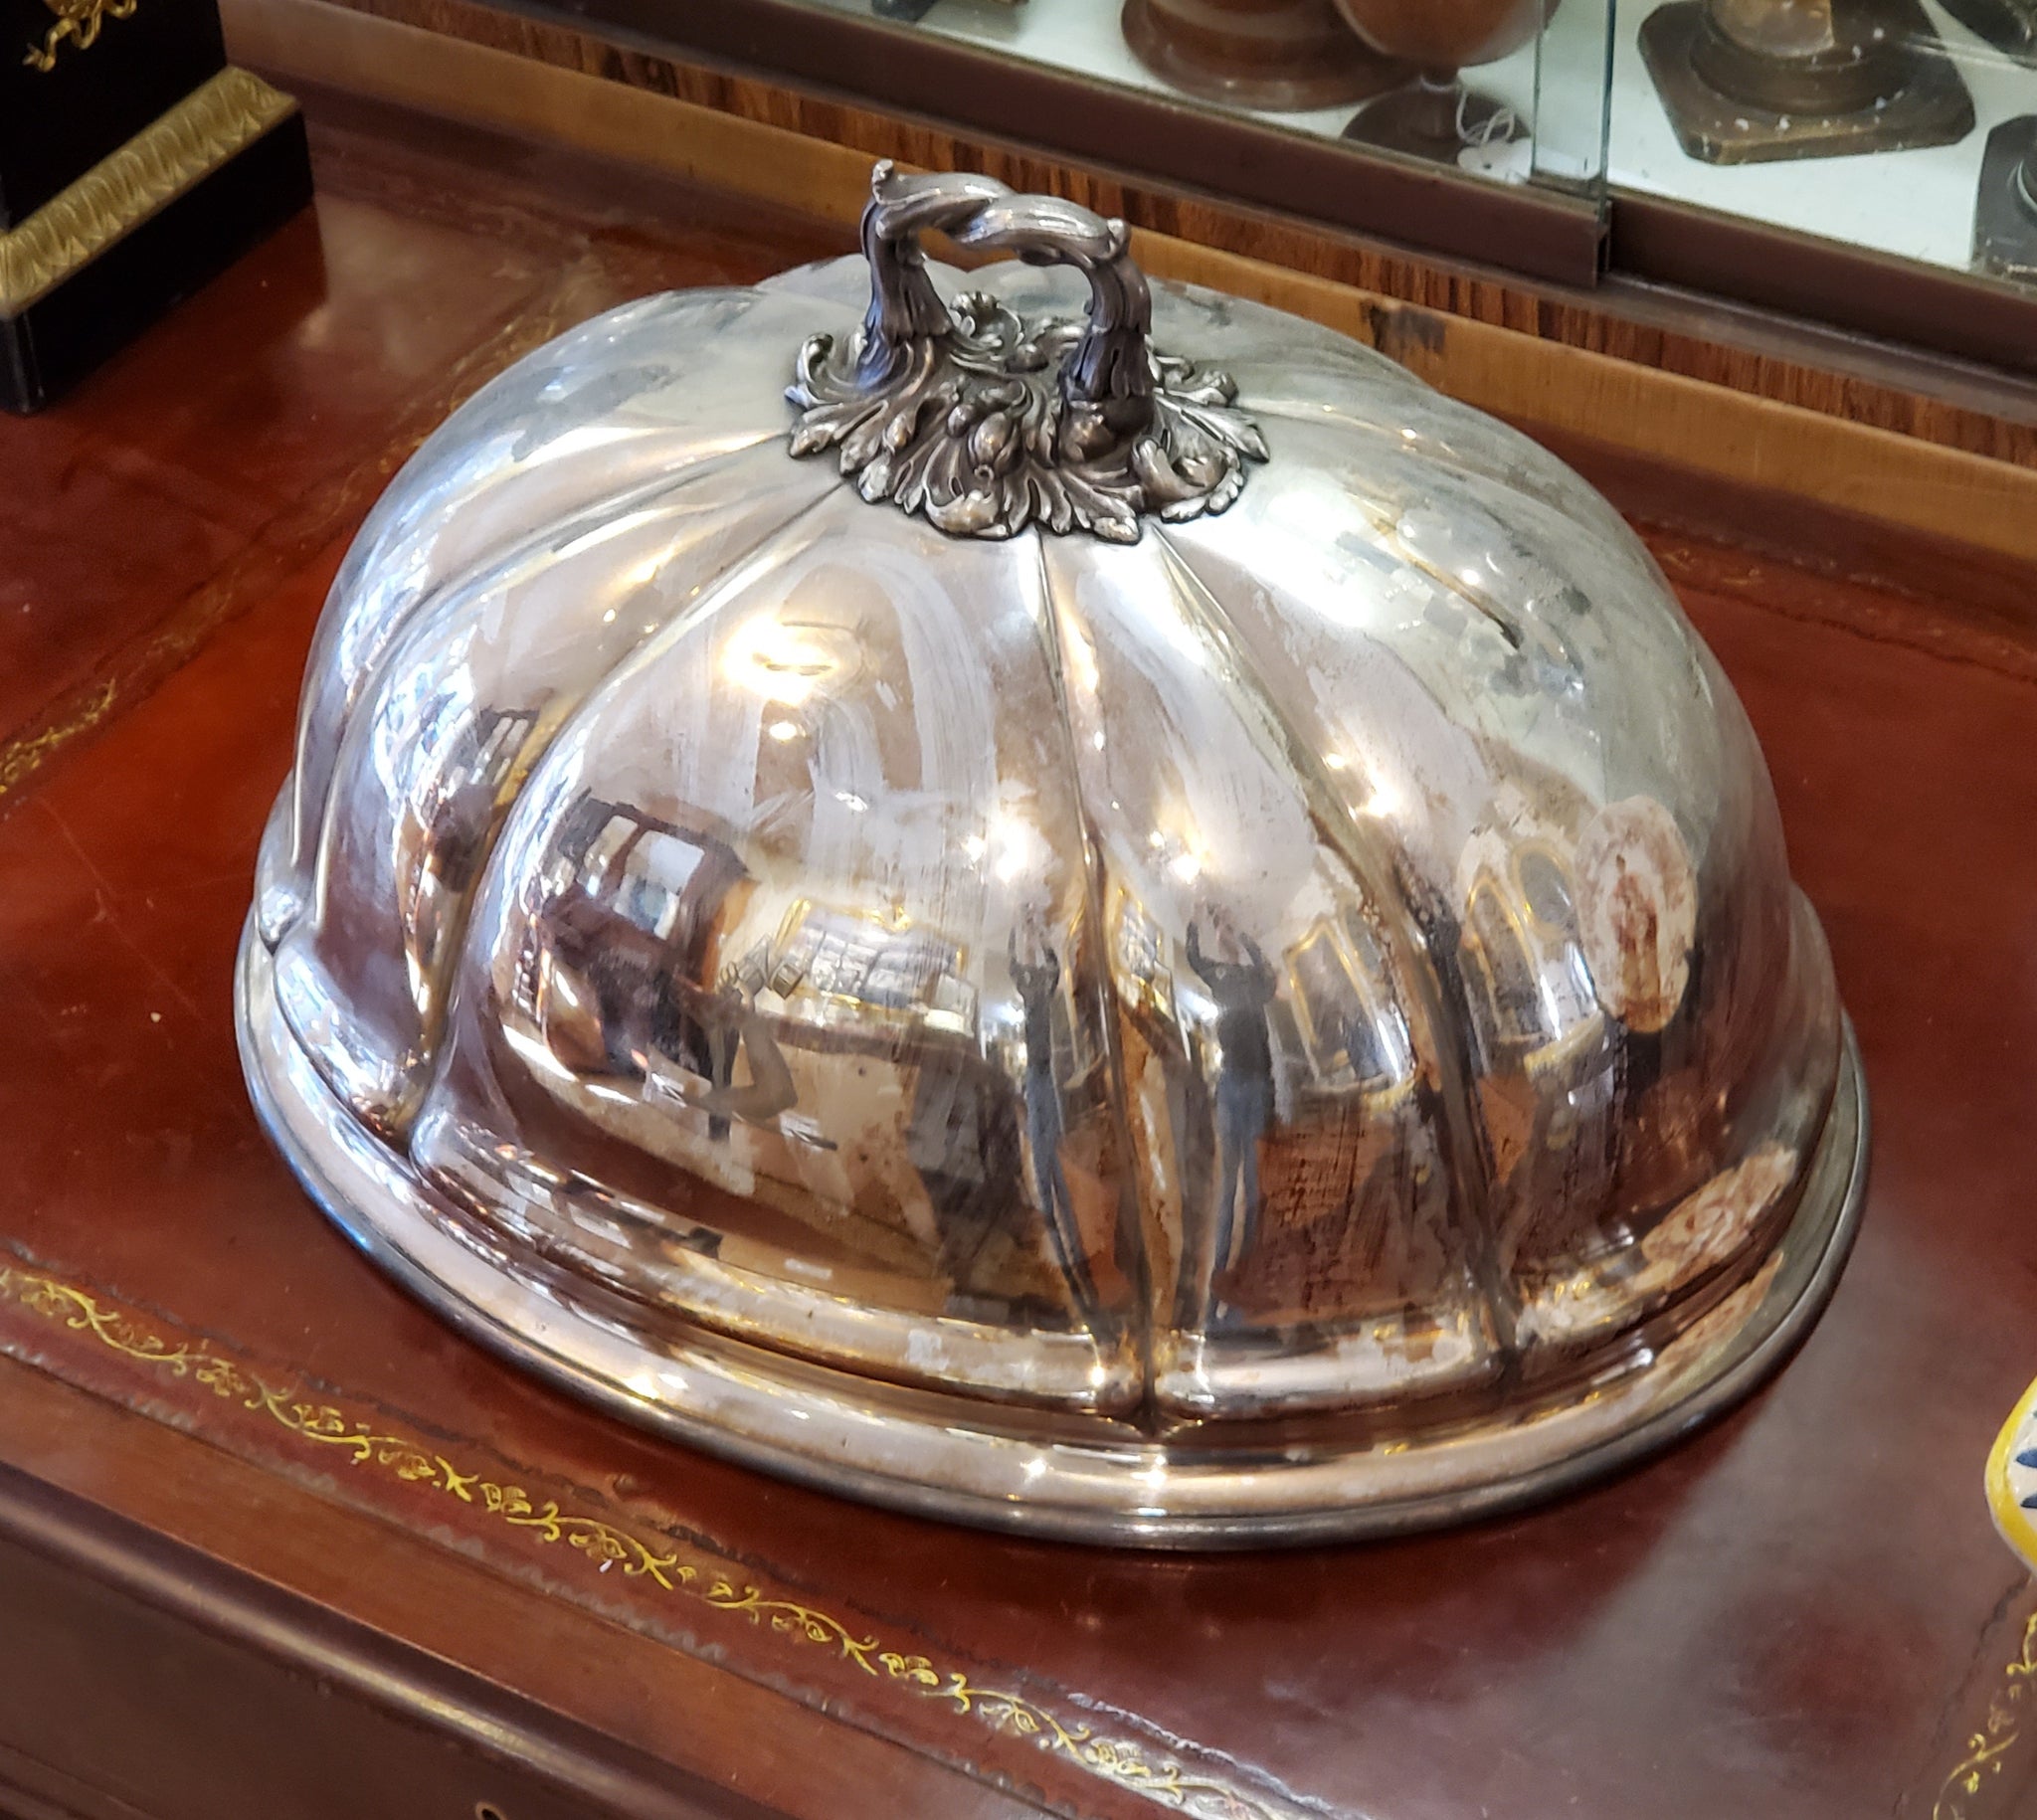 Antique Sheffield Silver Serving Dish Plate Cover by Roberts Smith Company circa 1830 (19th Century).